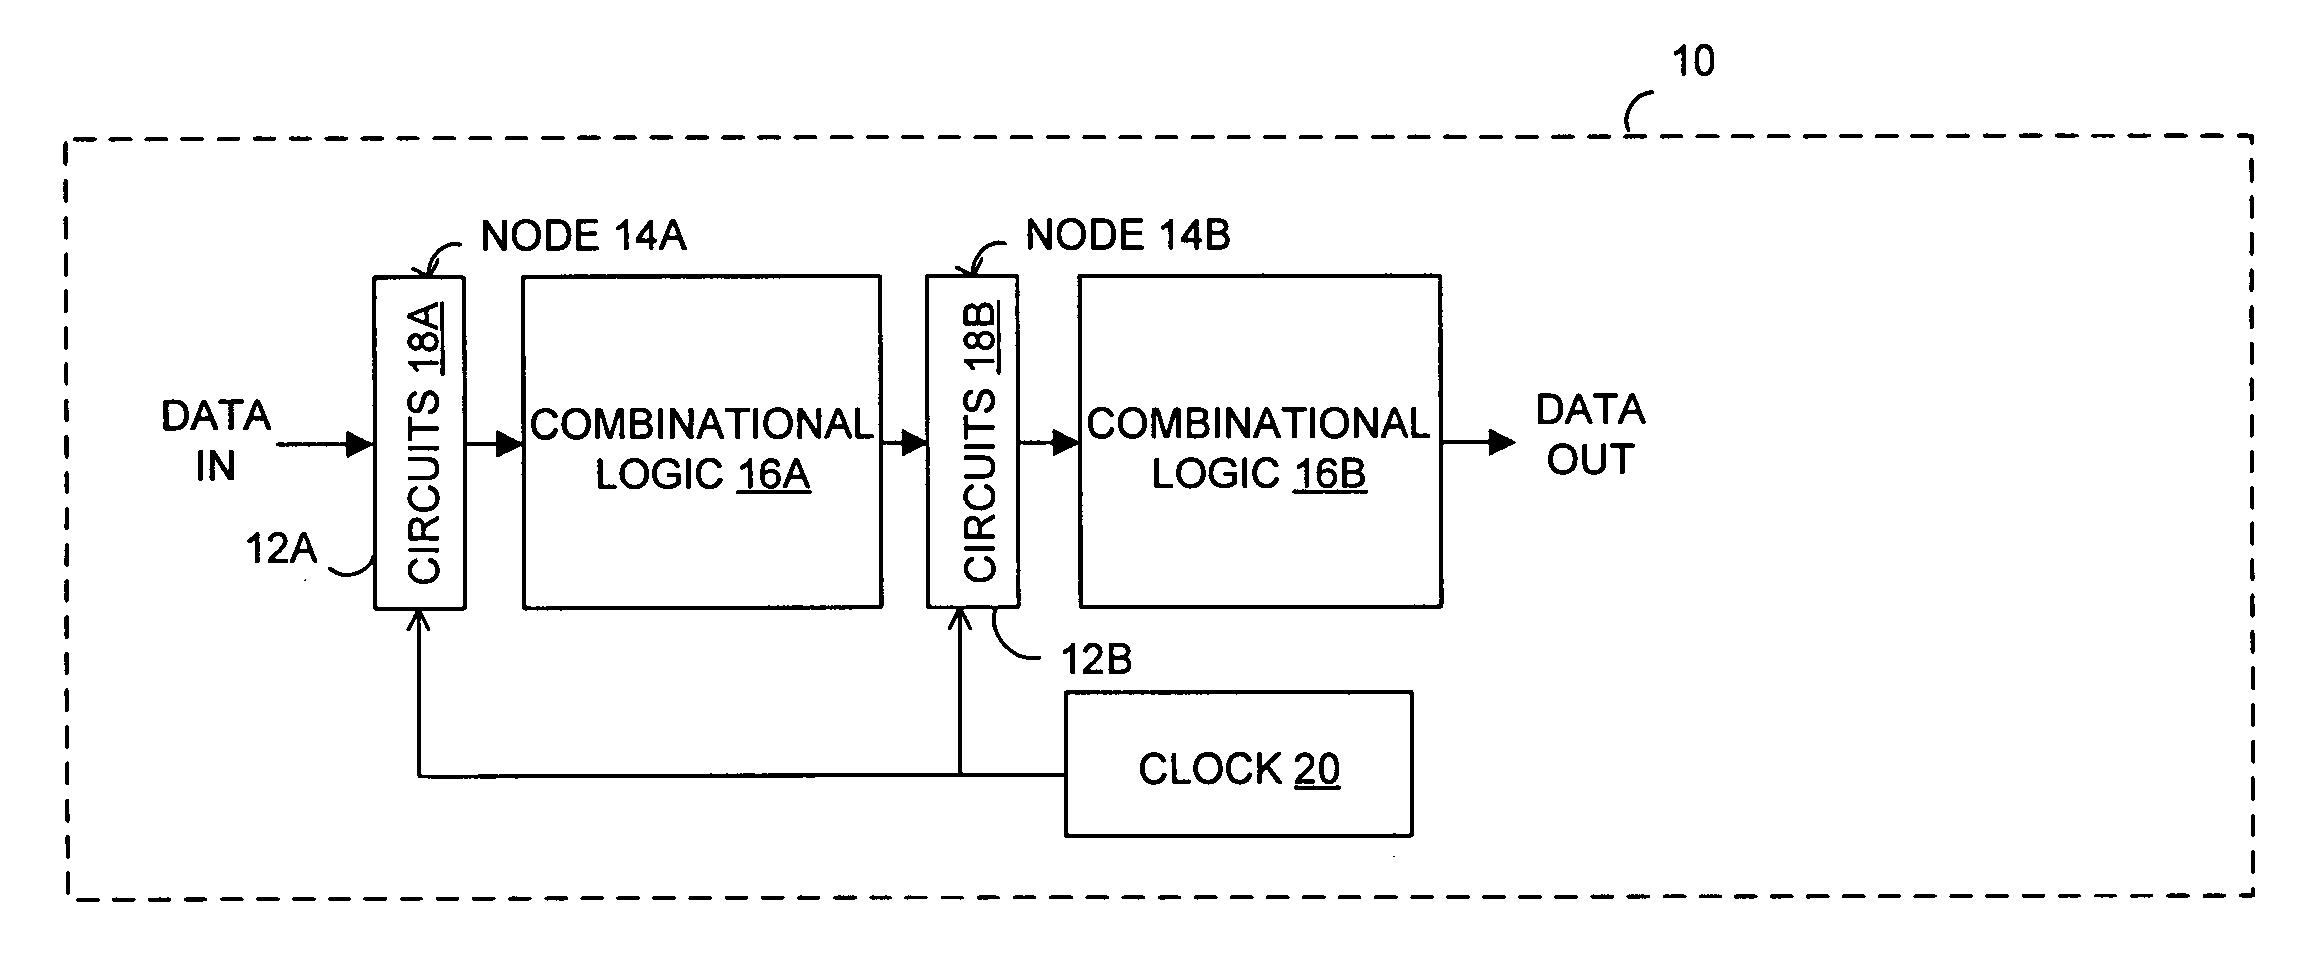 System and shadow bistable circuits coupled to output joining circuit